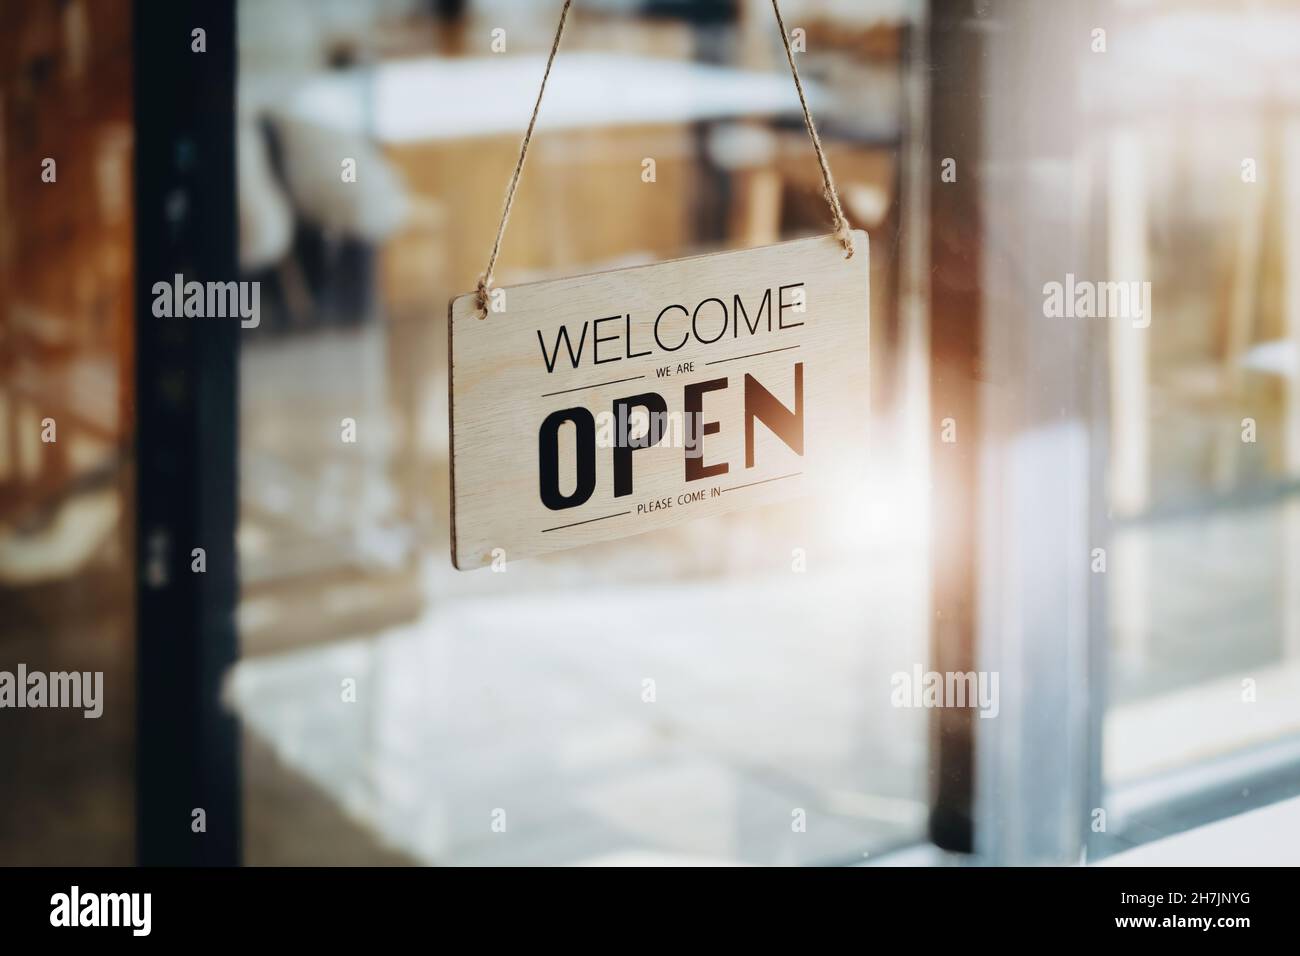 WELCOME WE ARE OPEN PLEASE COME IN notice sign wood board label hanging through glass door. Stock Photo